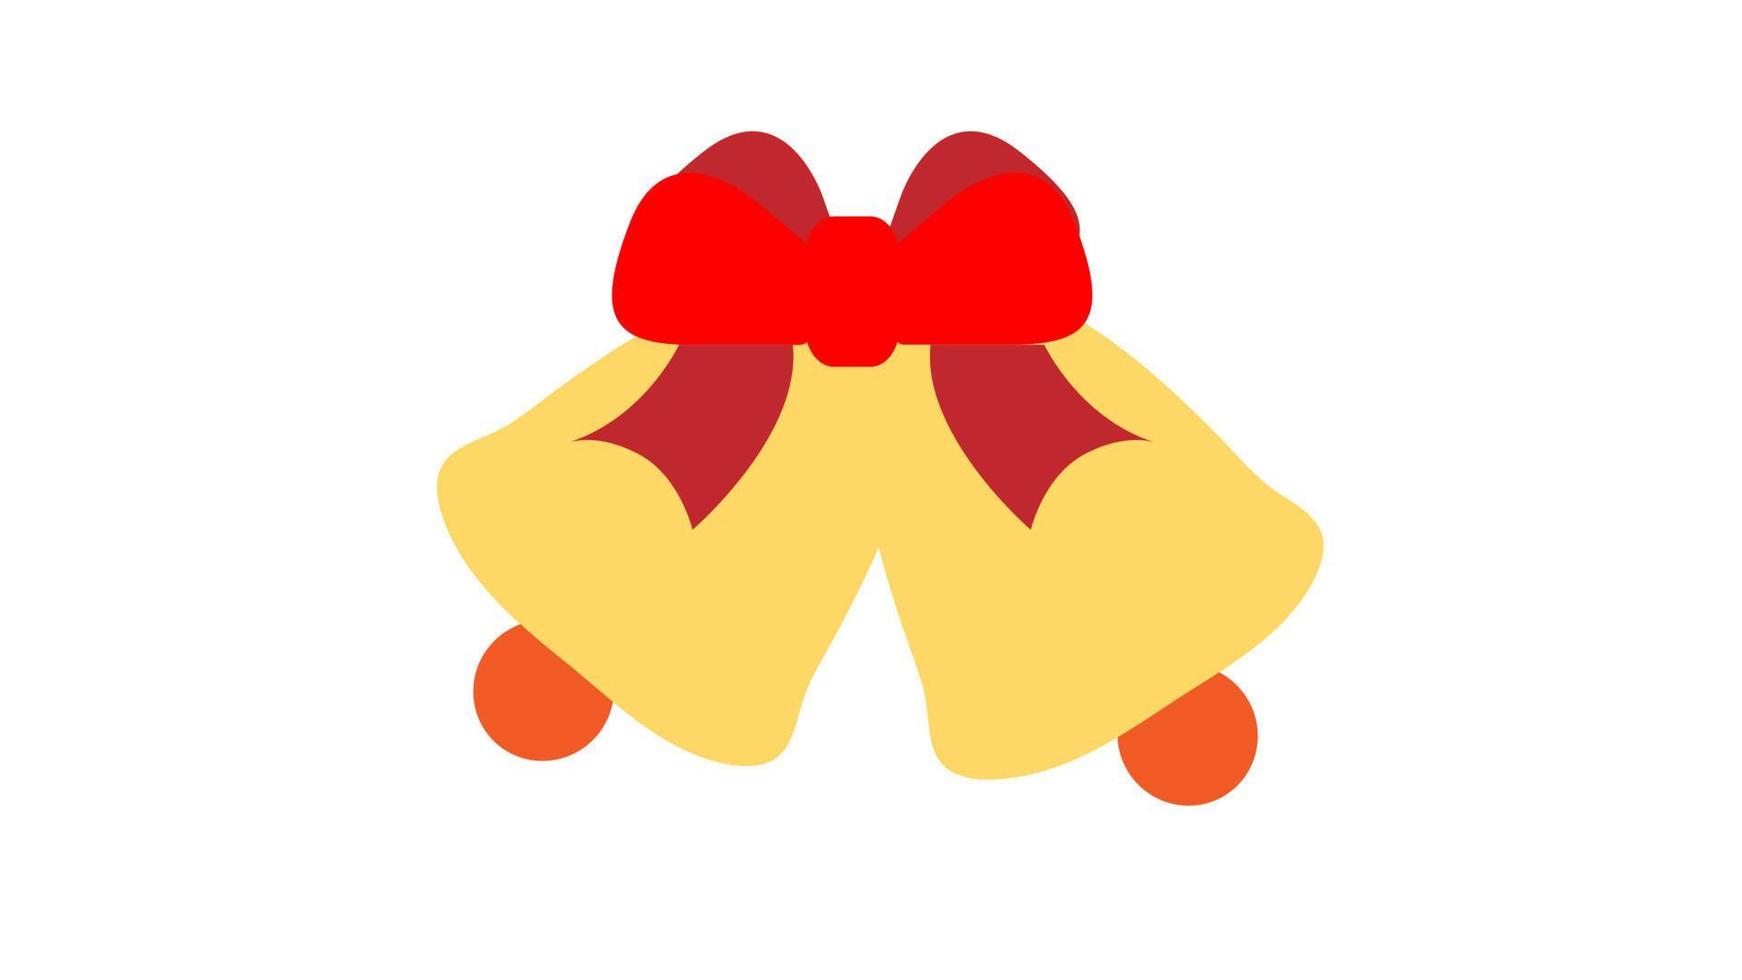 Christmas Bells With Red Bow On White Background. Xmas Decorations. Vector Eps10 Illustration